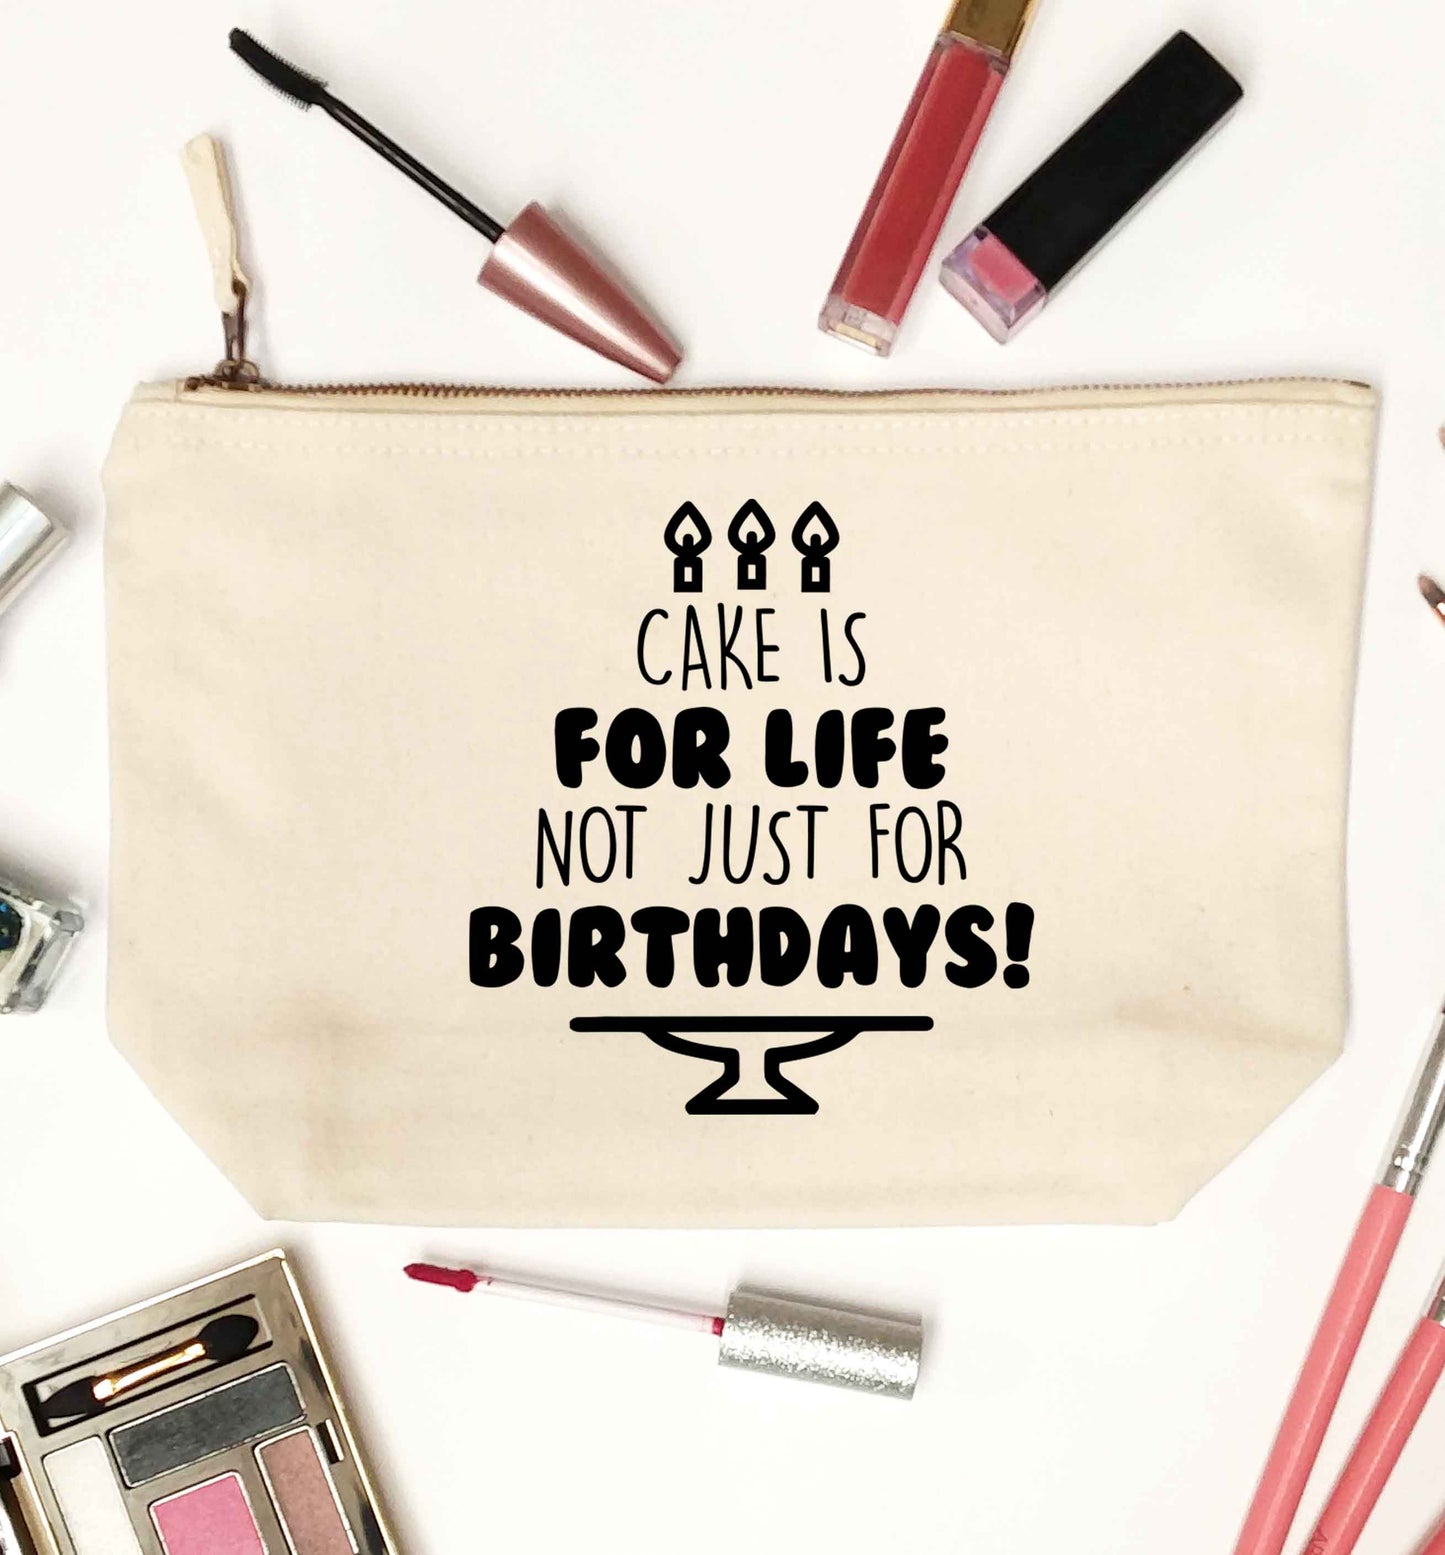 Cake is for life not just for birthdays natural makeup bag